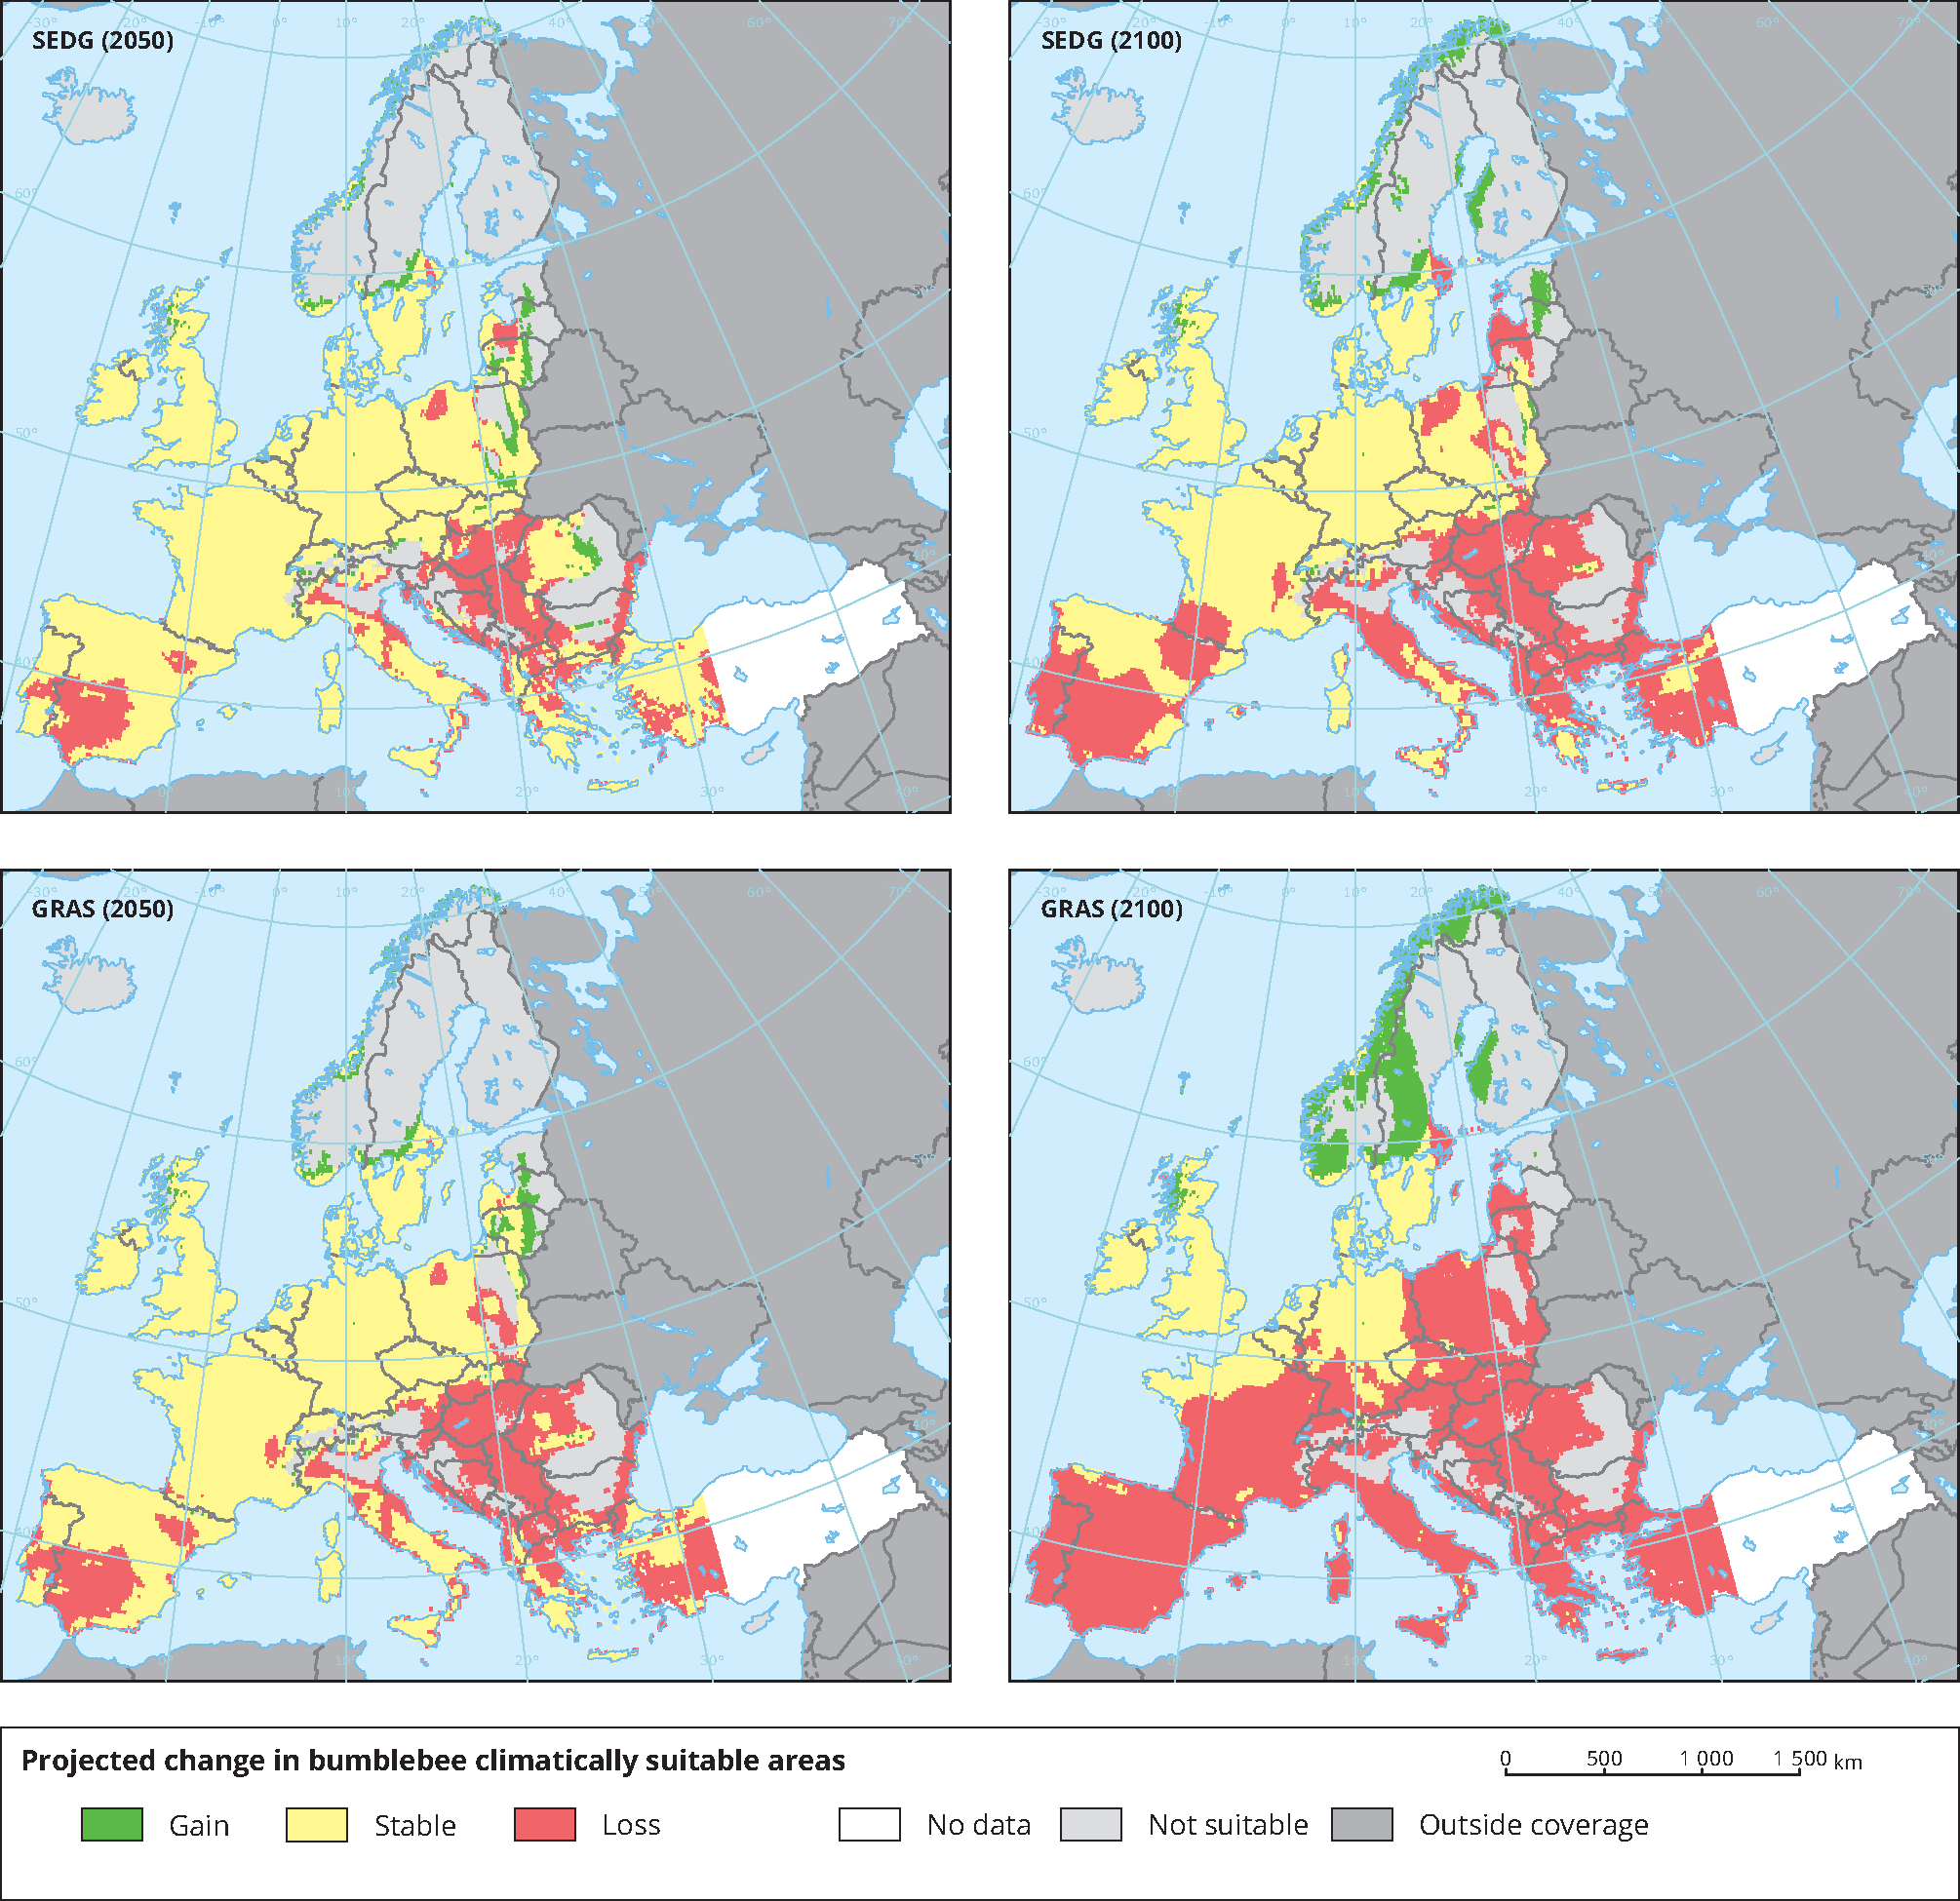 Projected change in Bumblebee climatically suitable areas